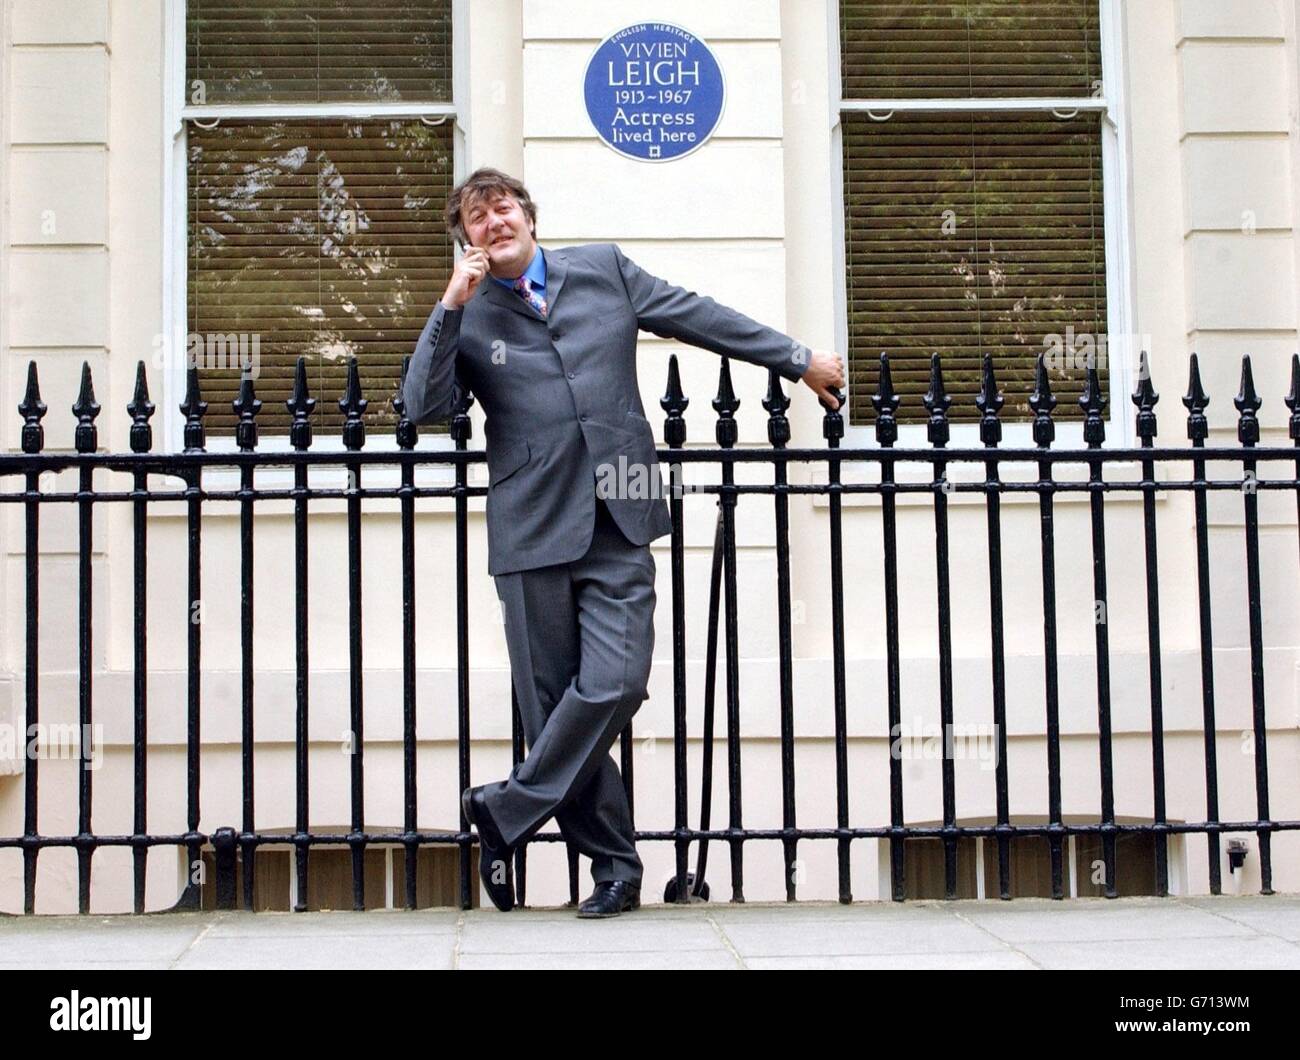 Actor and writer Stephen Fry poses outside 54 Eaton Square in London - the former home of actress Vivien Leigh - during the launch of 'Handheld History'. The innovative new guide for mobile phone users links them to the lives of famous figures commemorated with English Heritage Blue Plaques in Central London. Stock Photo